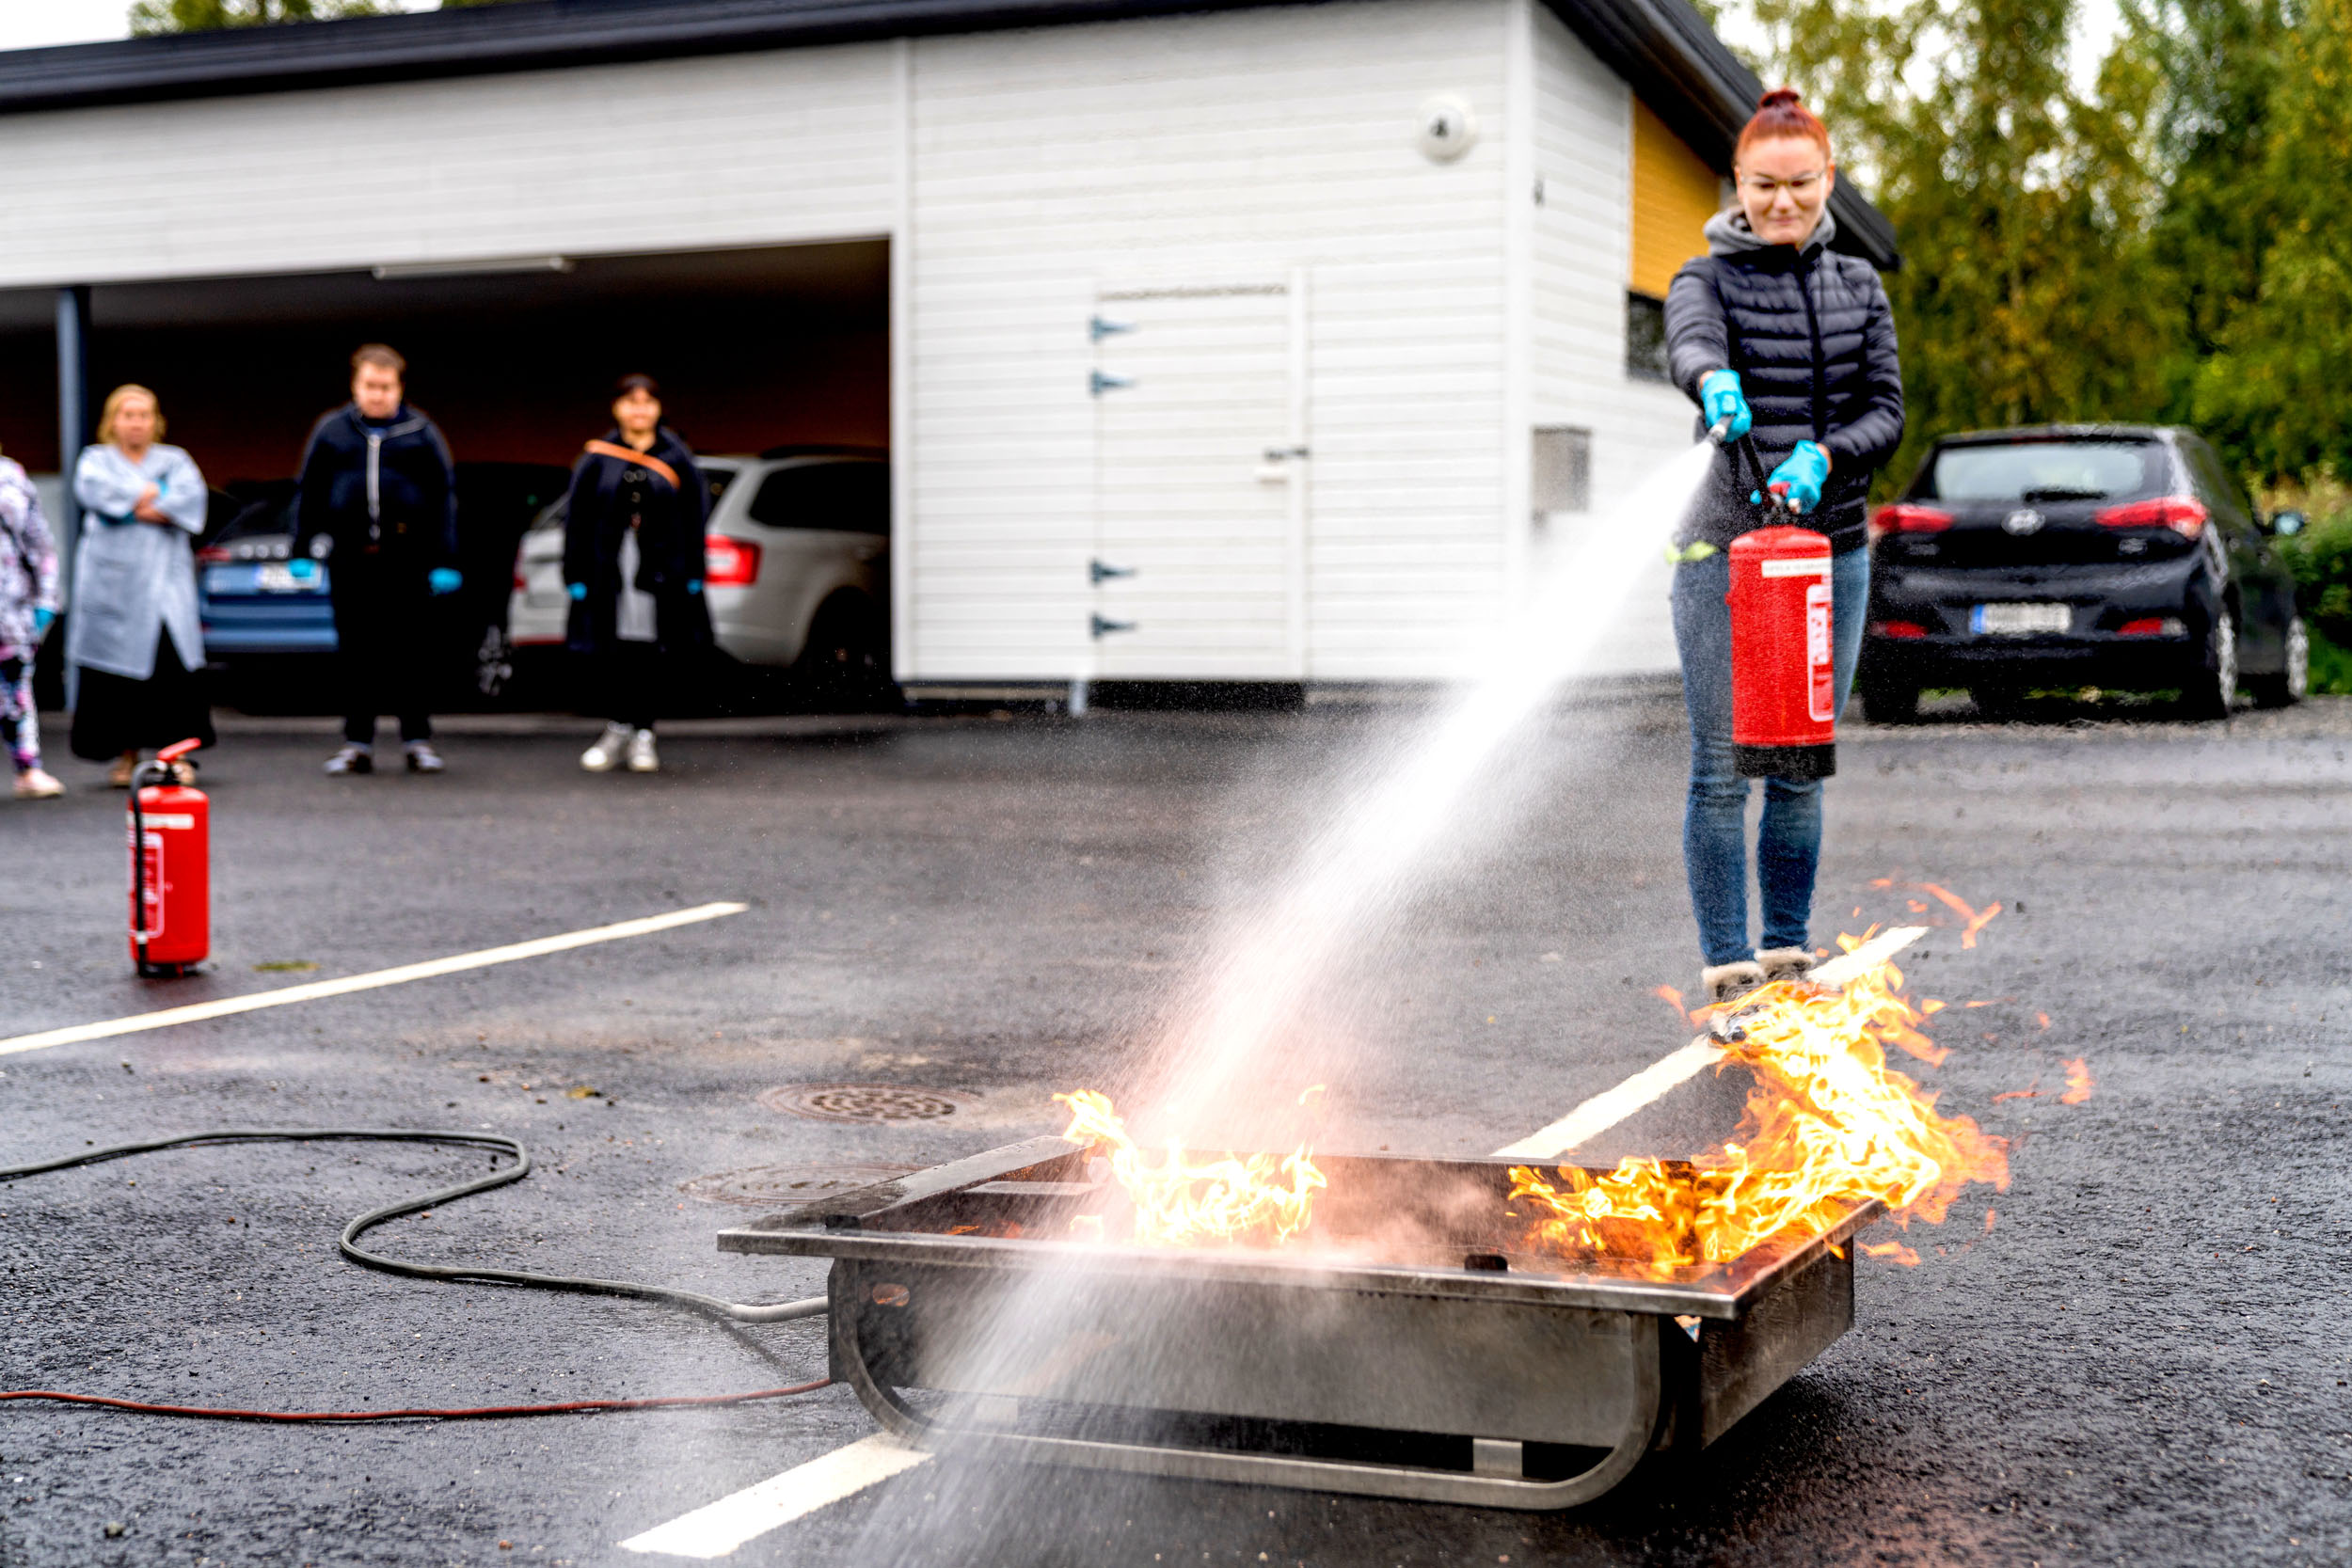  Trainee using a fire extinguisher 